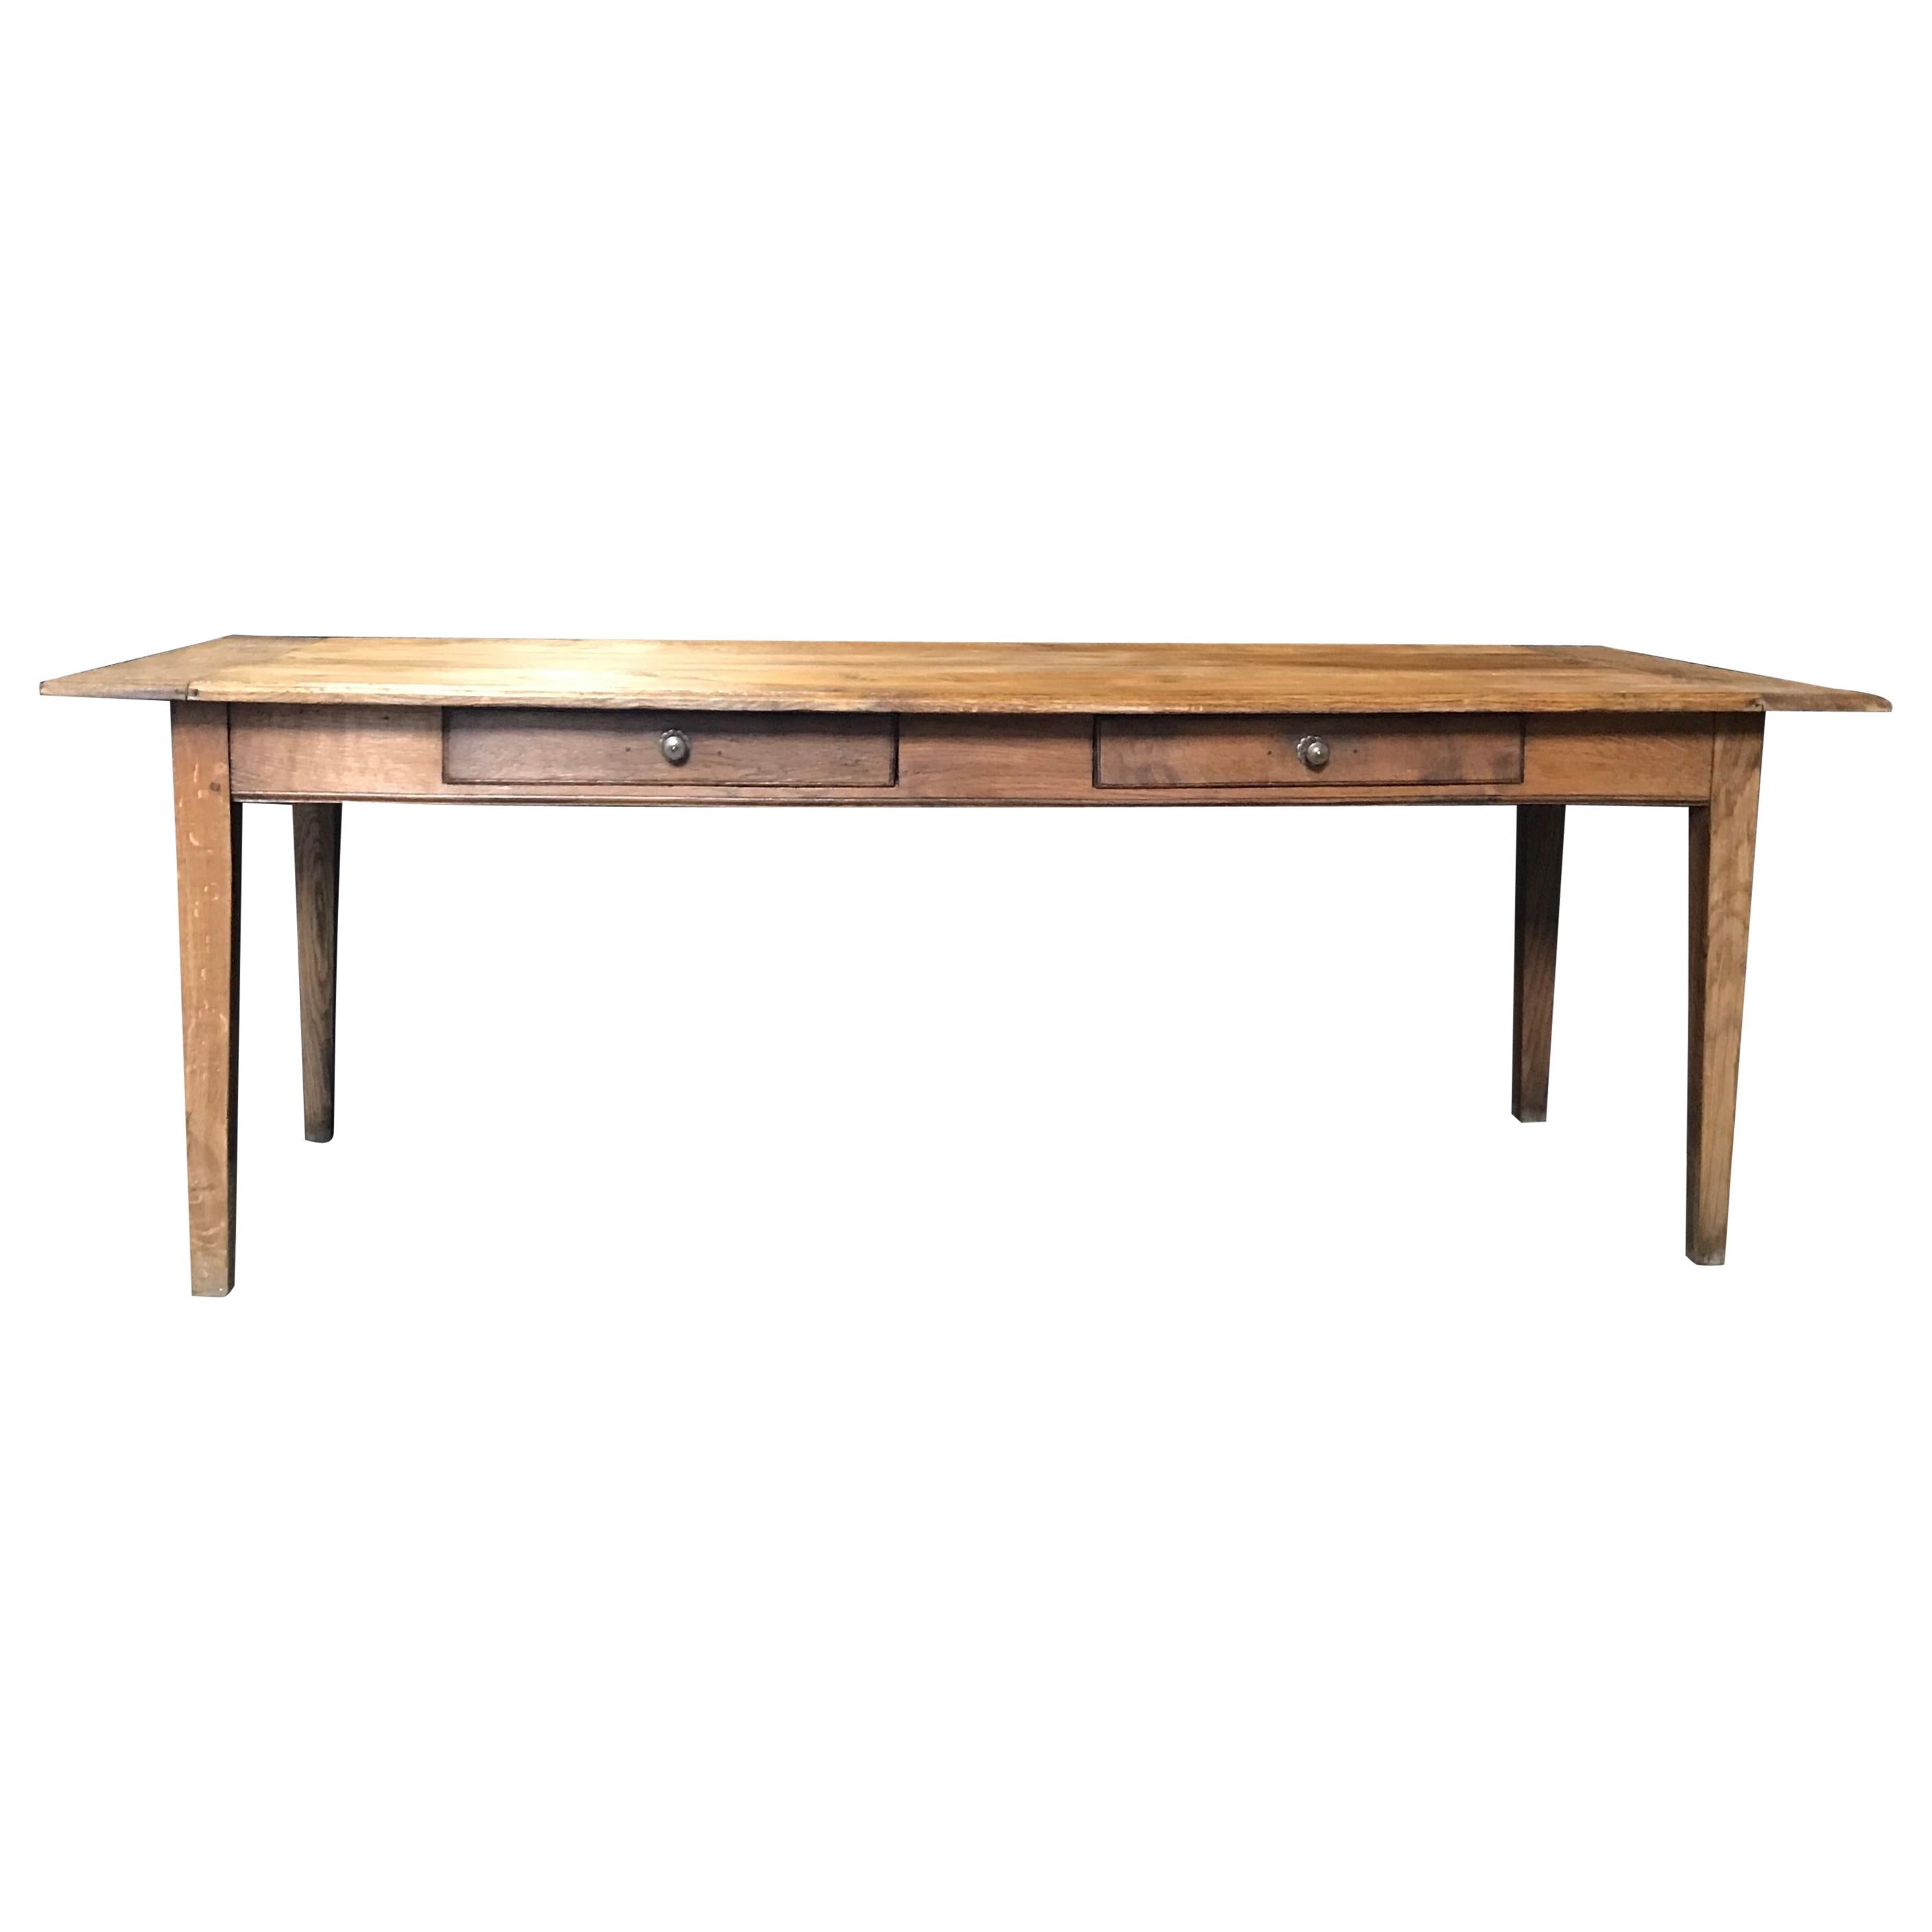 Authentic French Country Farmhouse Table from Provence